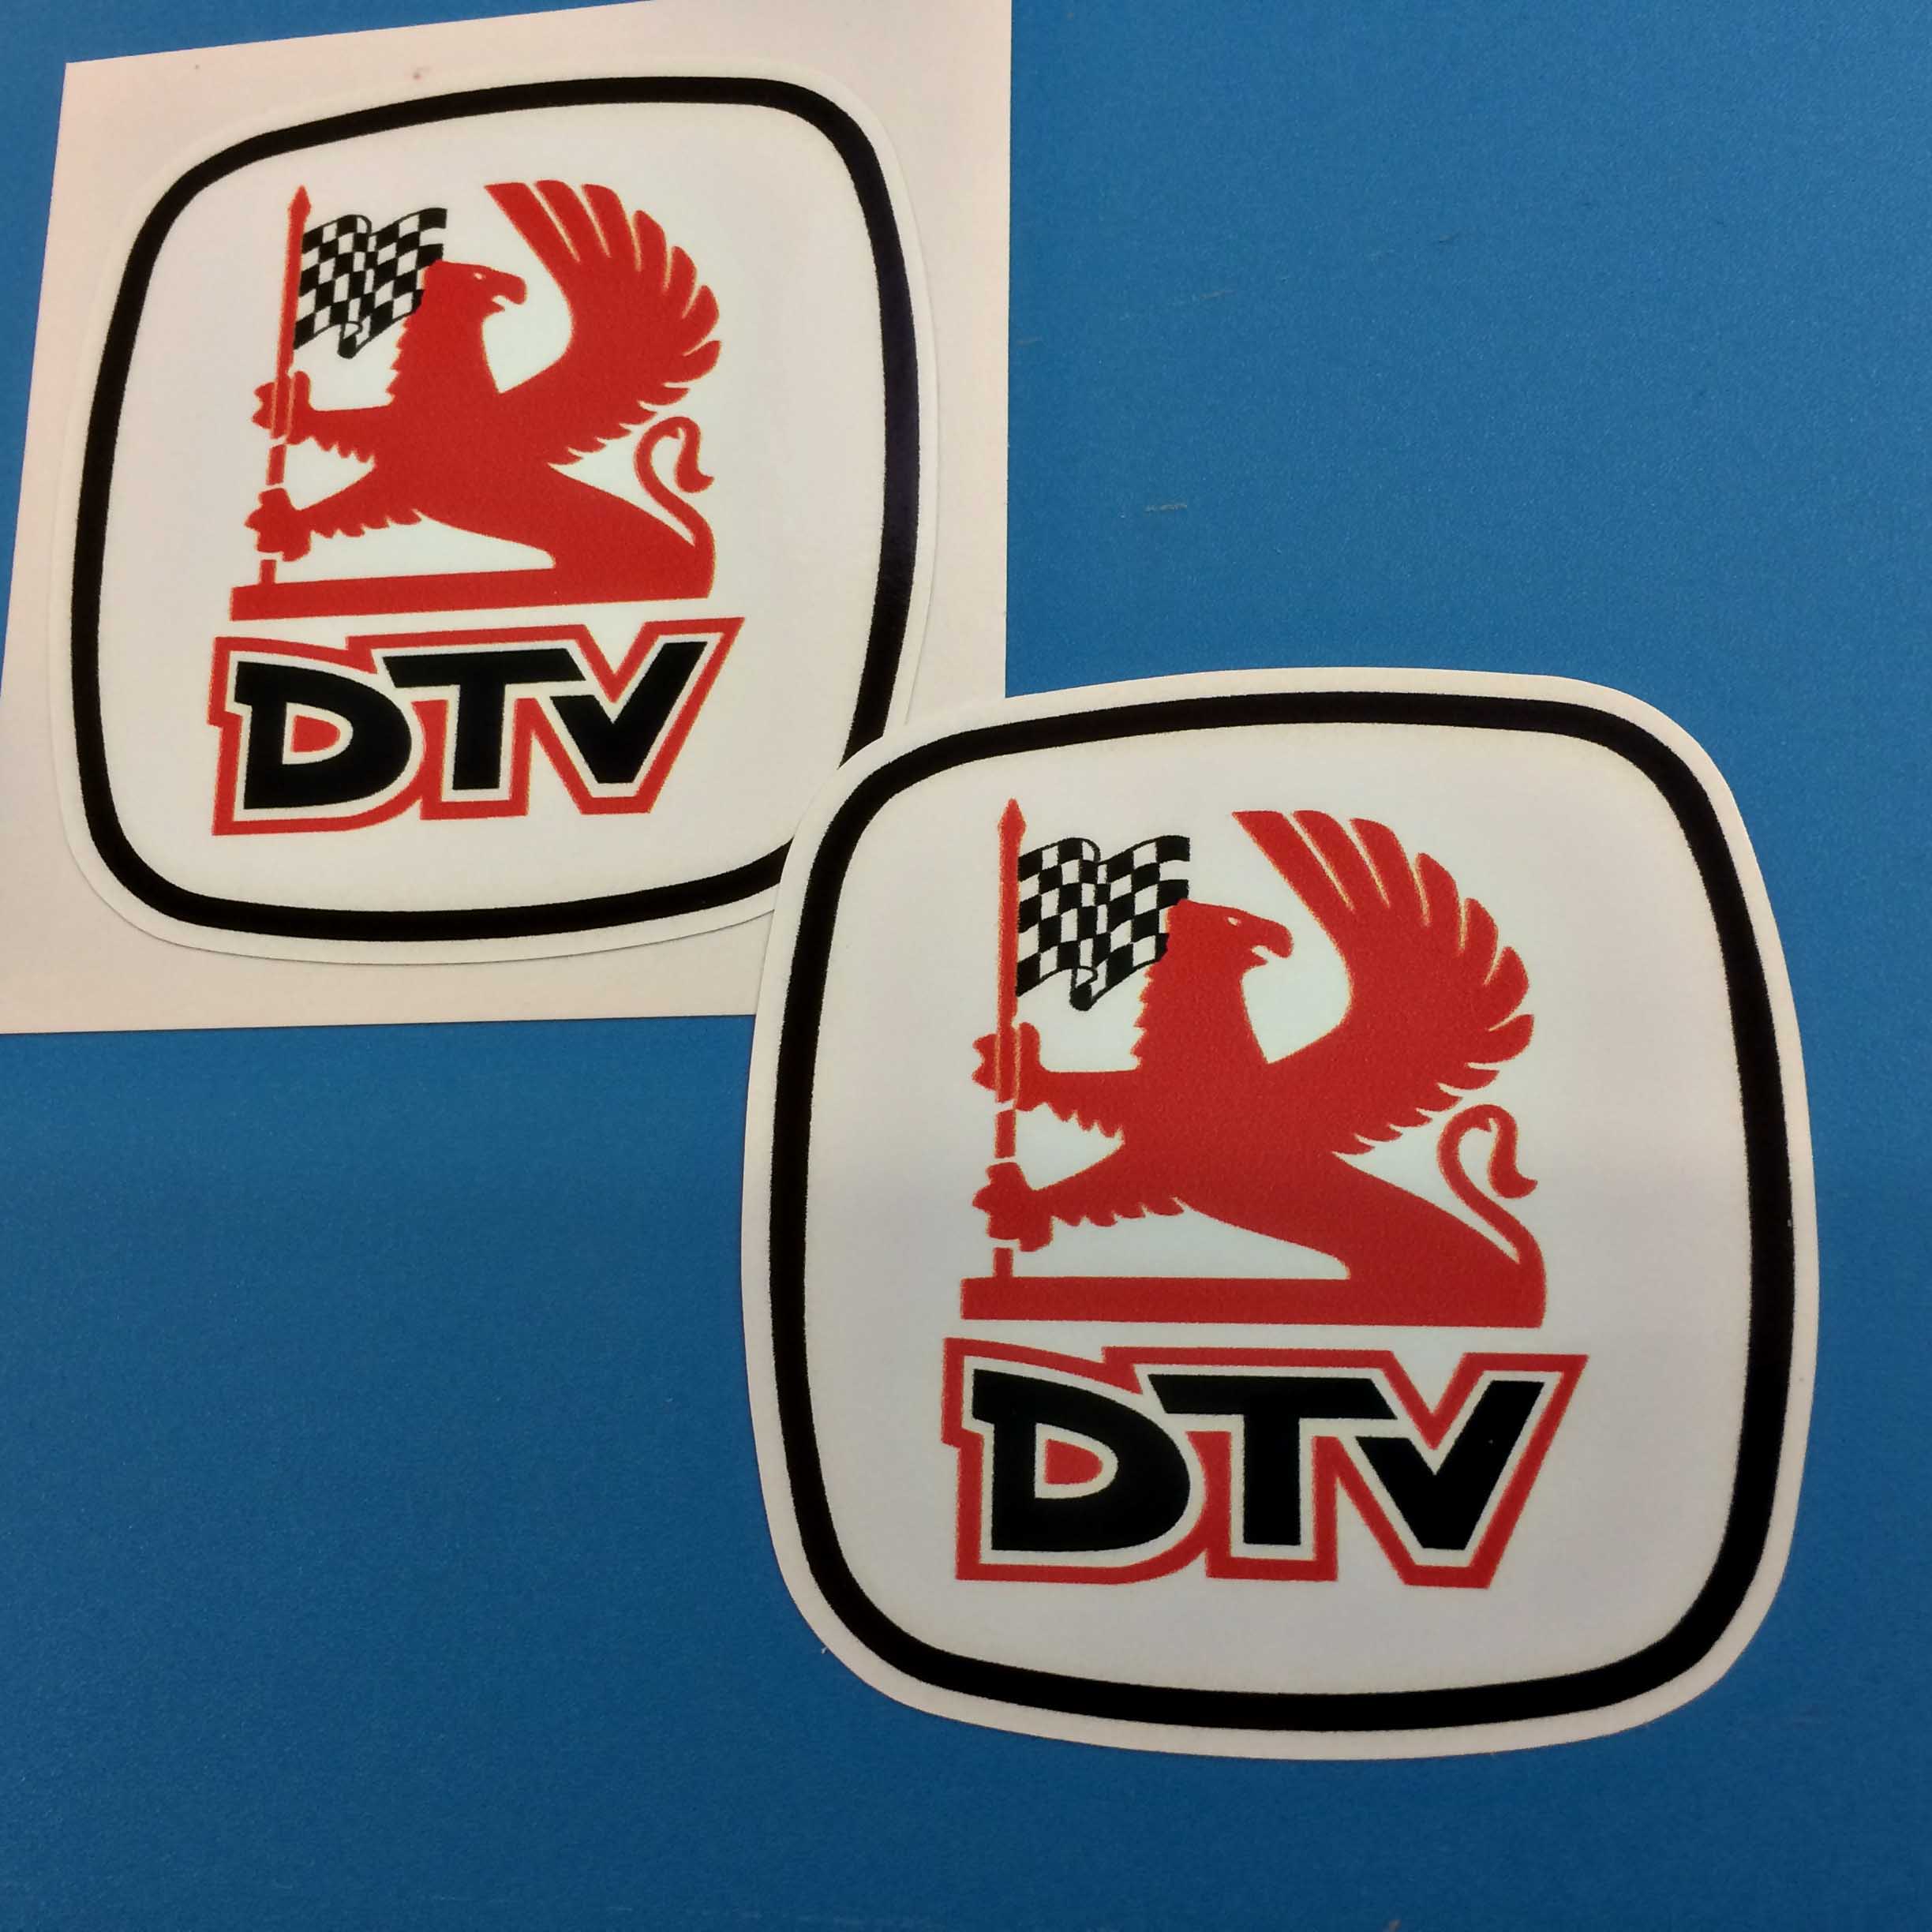 DTV DEALER TEAM STICKERS. Centre is a red Griffin holding a black and white chequered flag on a flagpole. Below the Griffin edged in red and white are letters DTV in black.